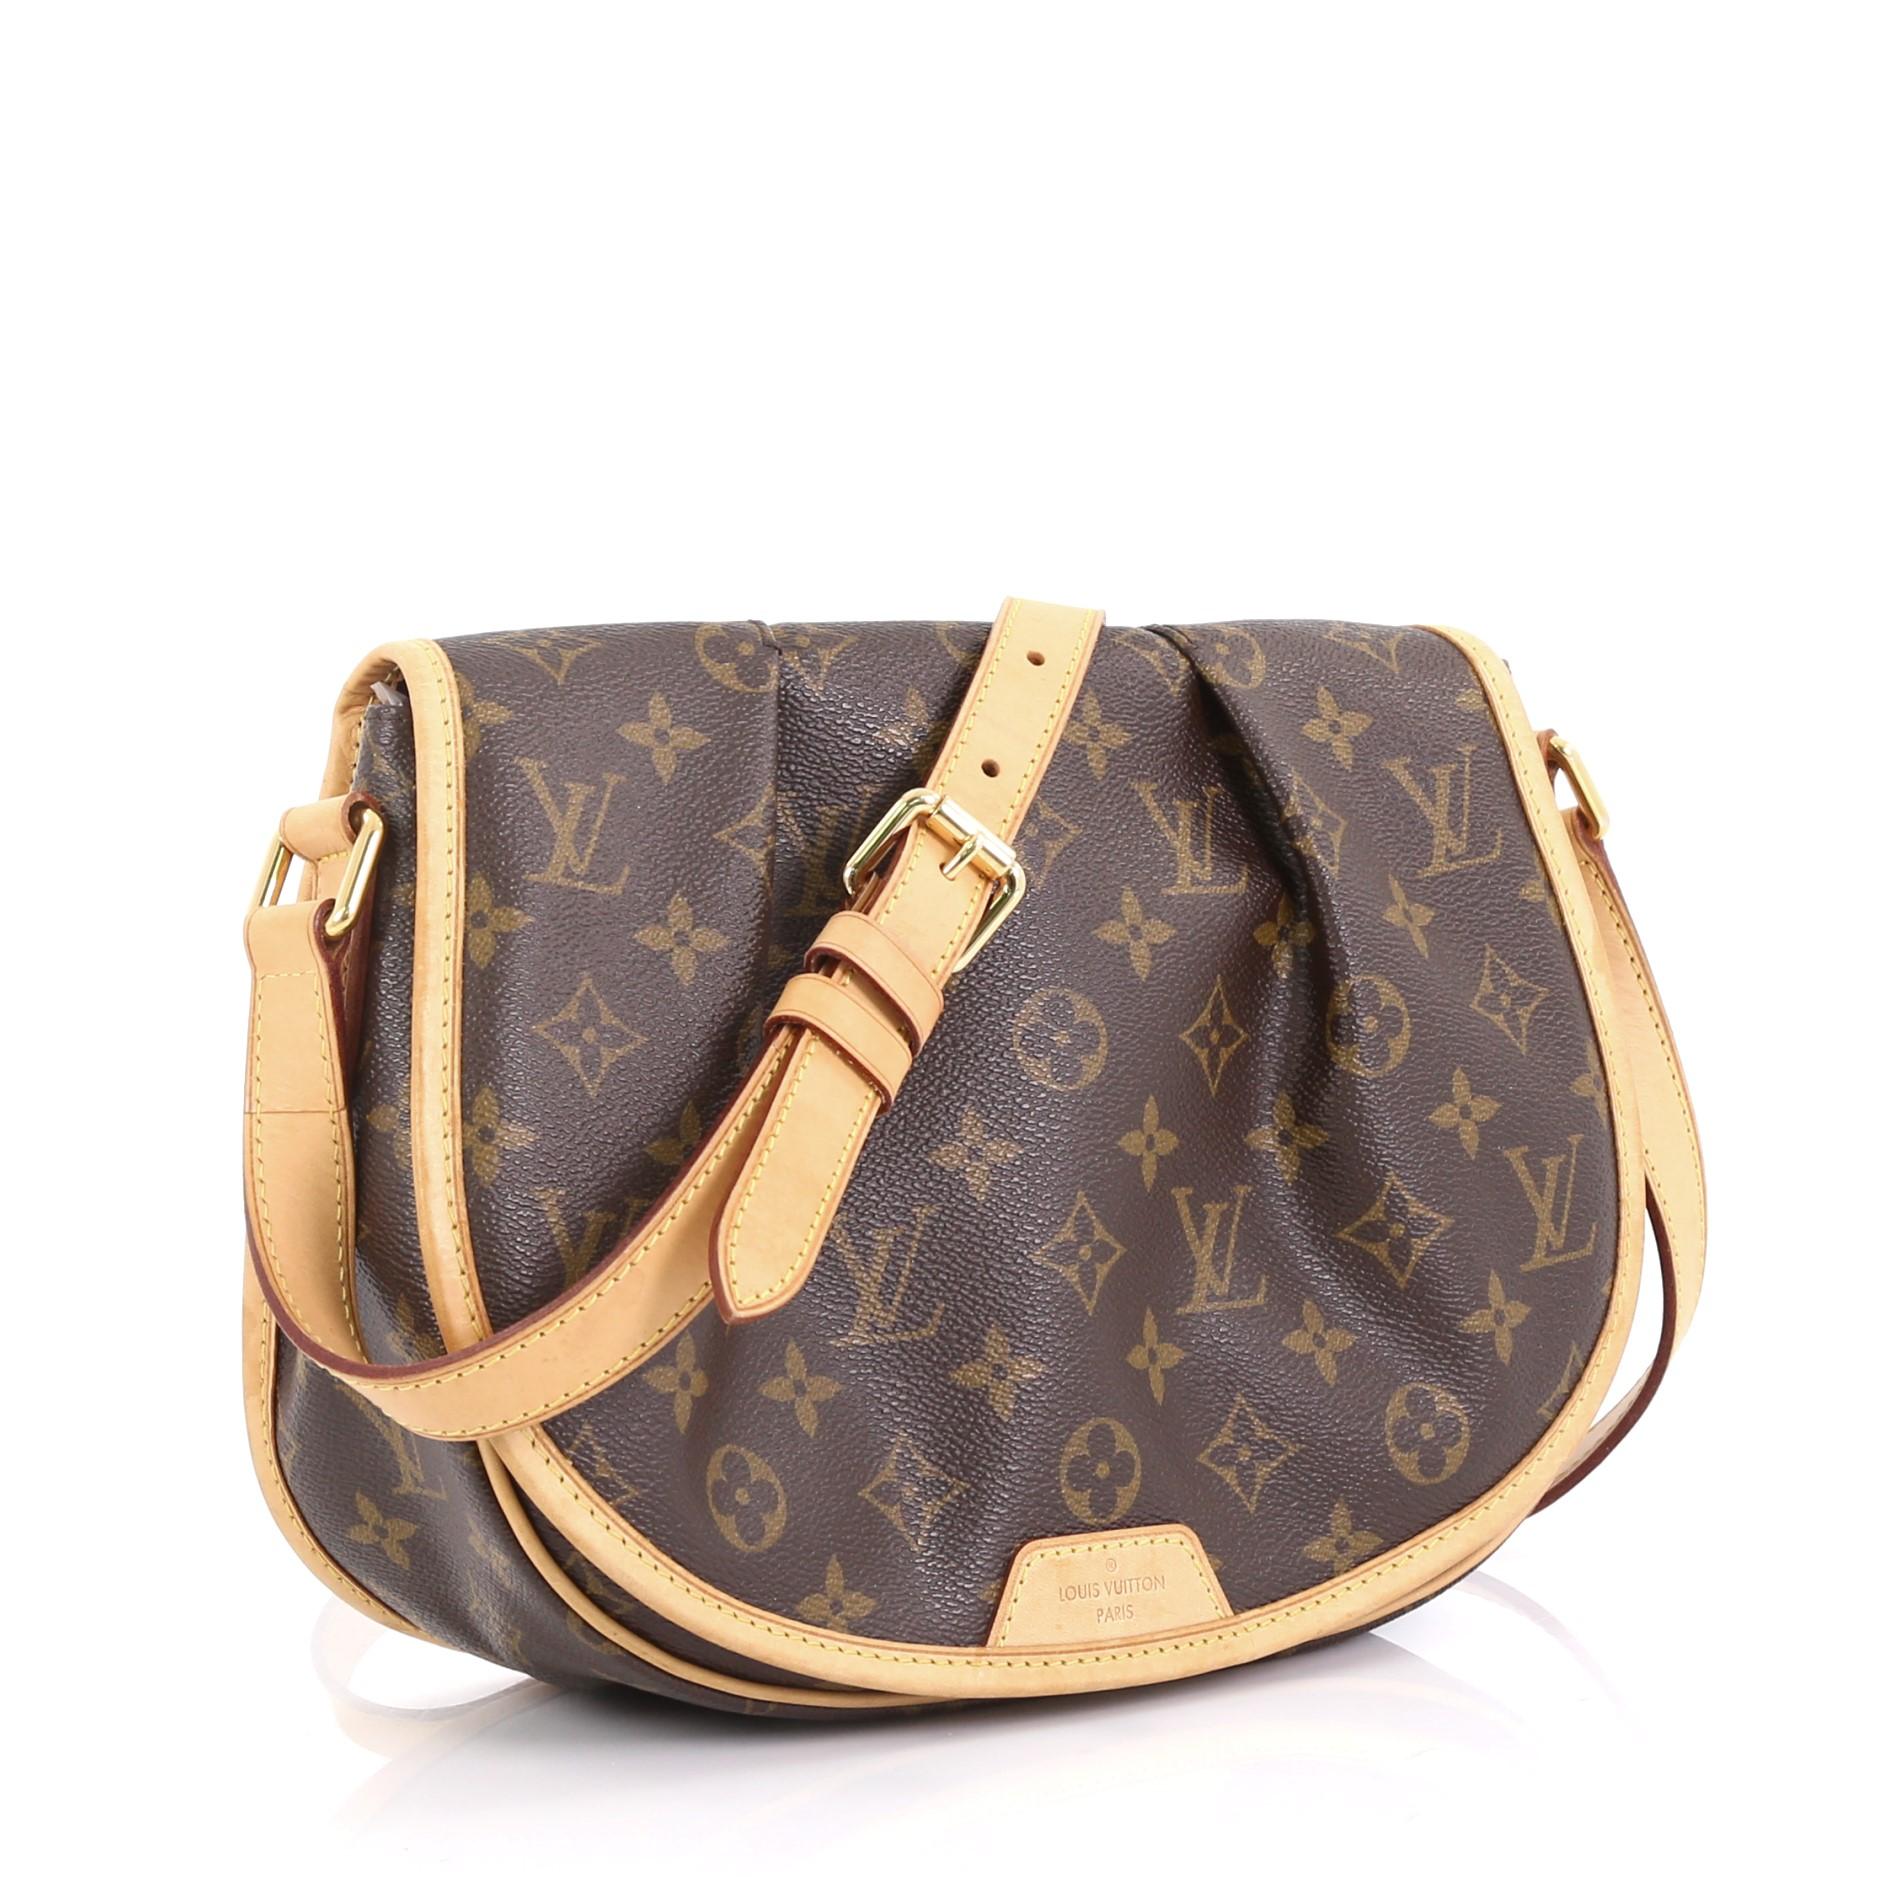 This Louis Vuitton Menilmontant Handbag Monogram Canvas PM, crafted in brown monogram coated canvas, features a full frontal flap with pleated design, flat leather adjustable shoulder strap, and gold-tone hardware. Its hidden magnetic snap closure